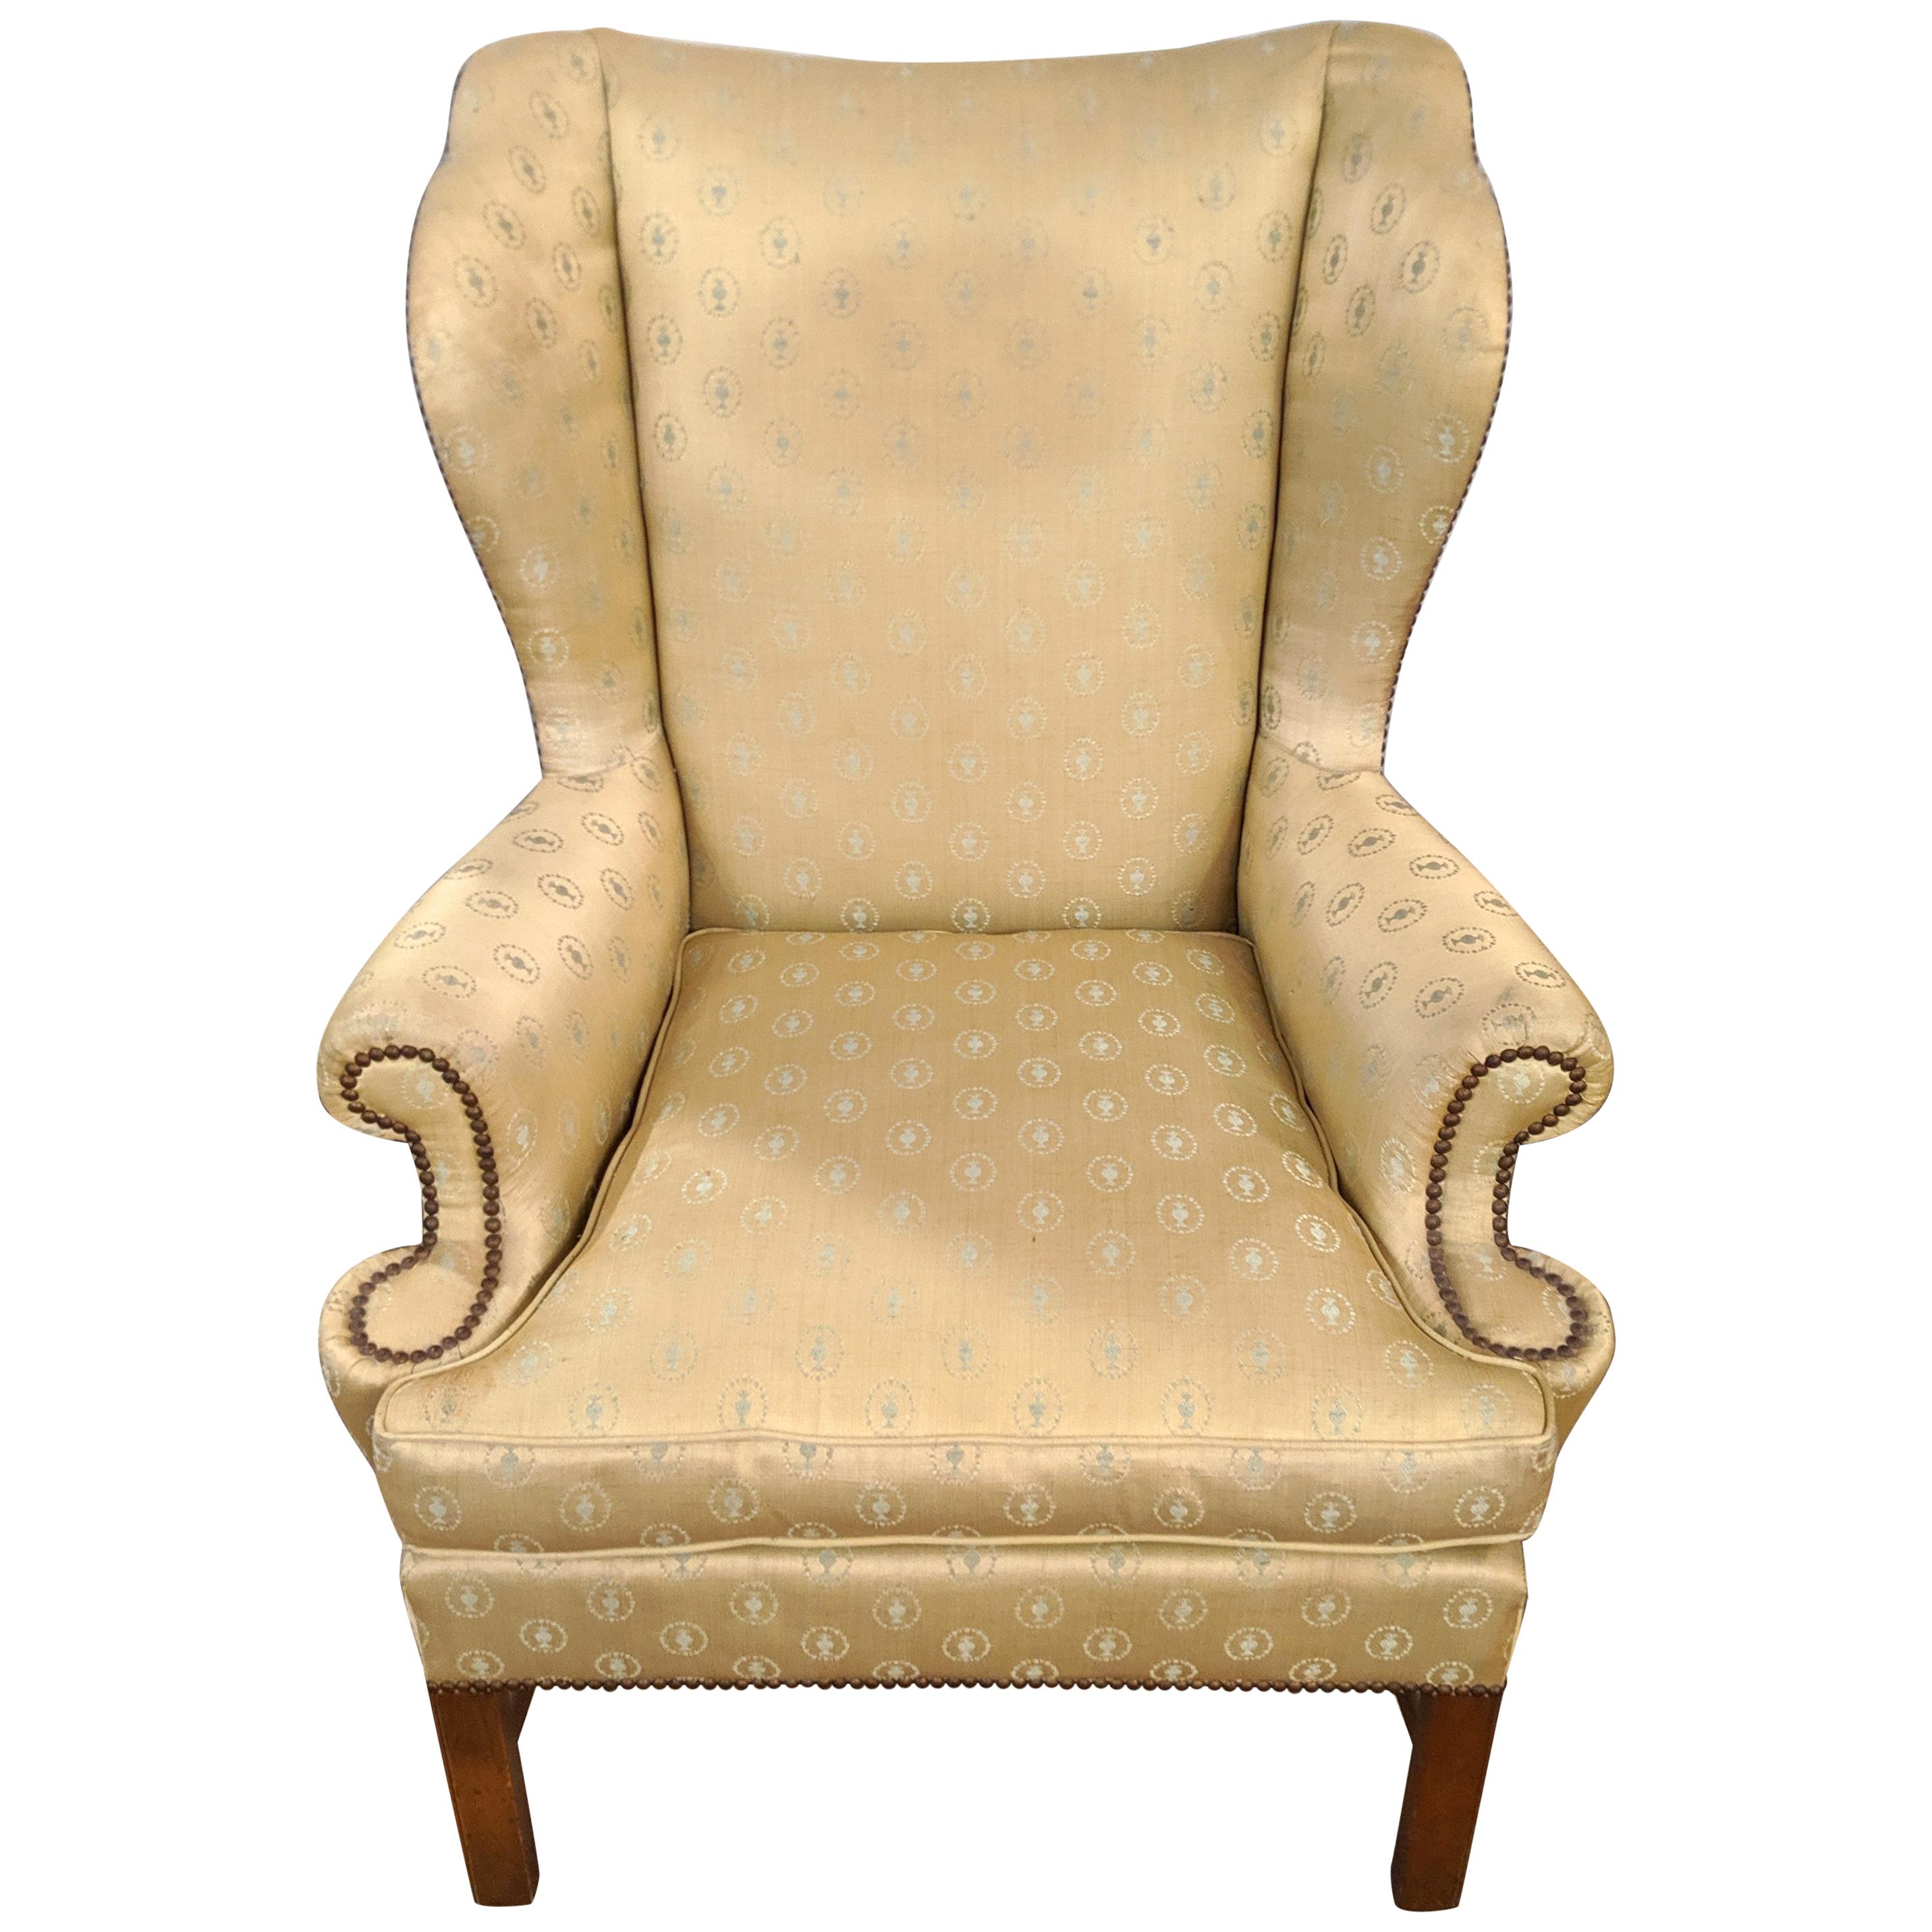  Baker Furniture Company Chippendale Wingback or Desk Chair in a Fine Fabric 